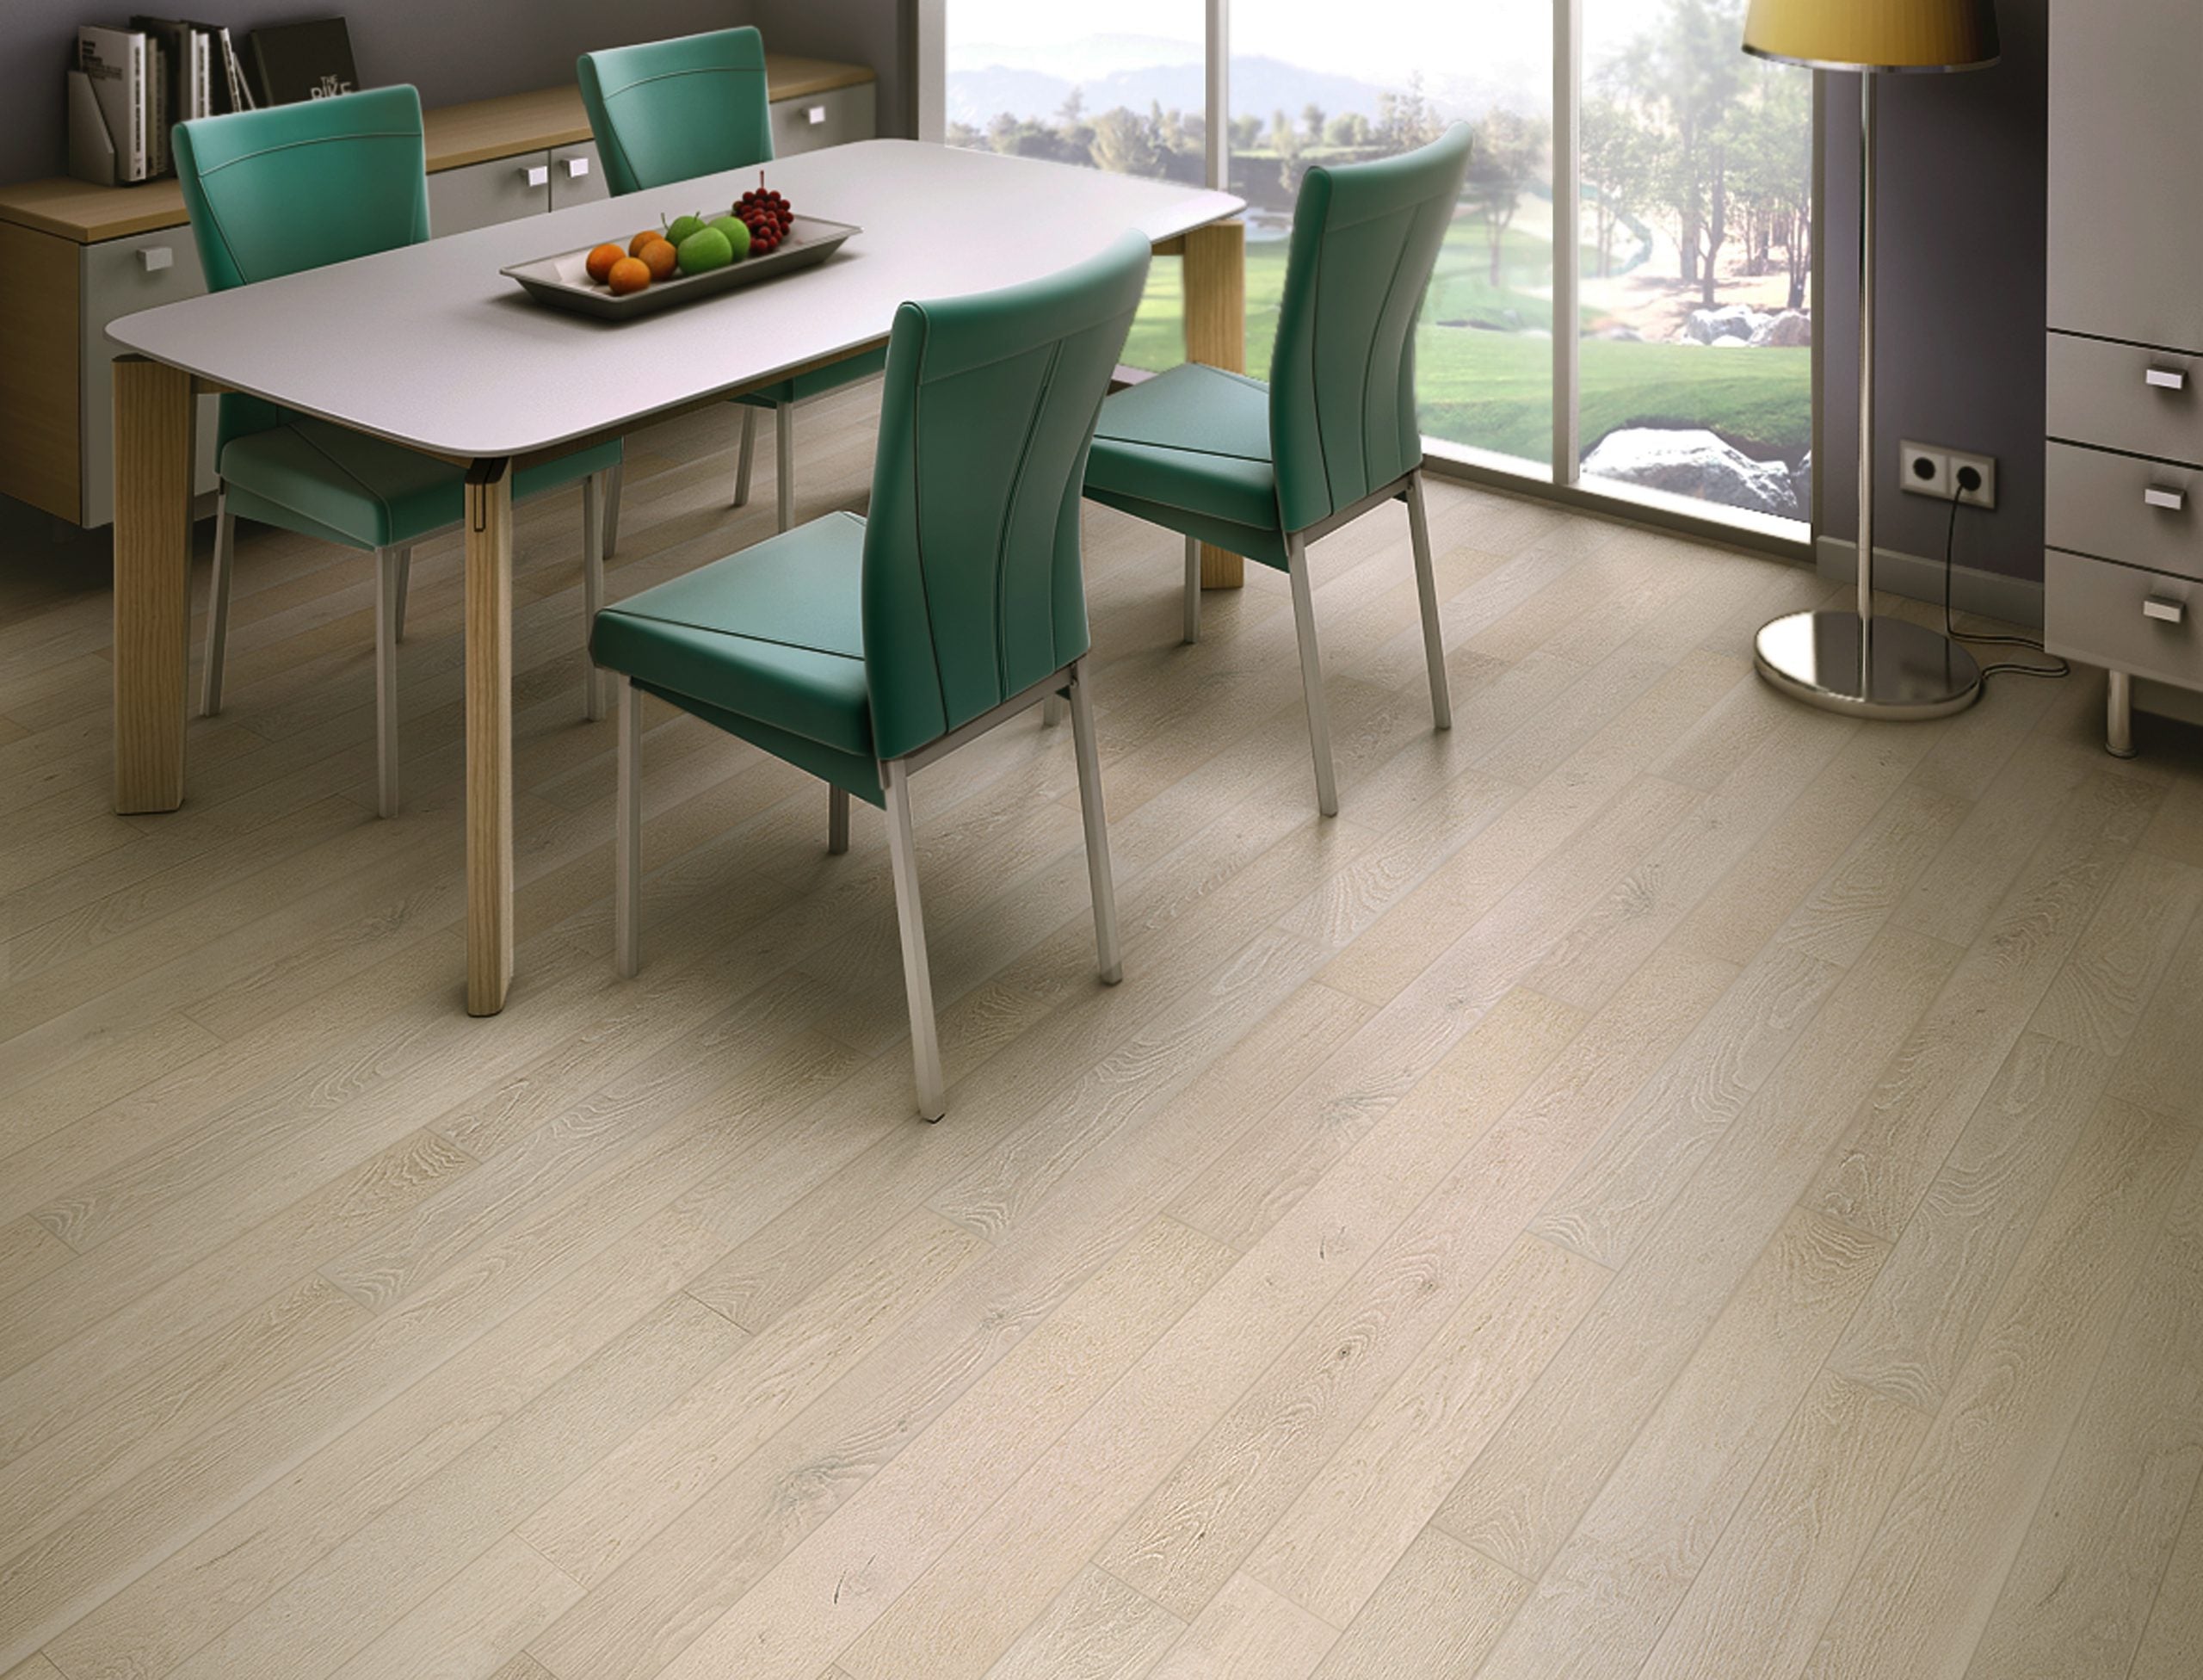 teka studio linen sawn white oak natural hardwood flooring plank stained white distributed by surface group international